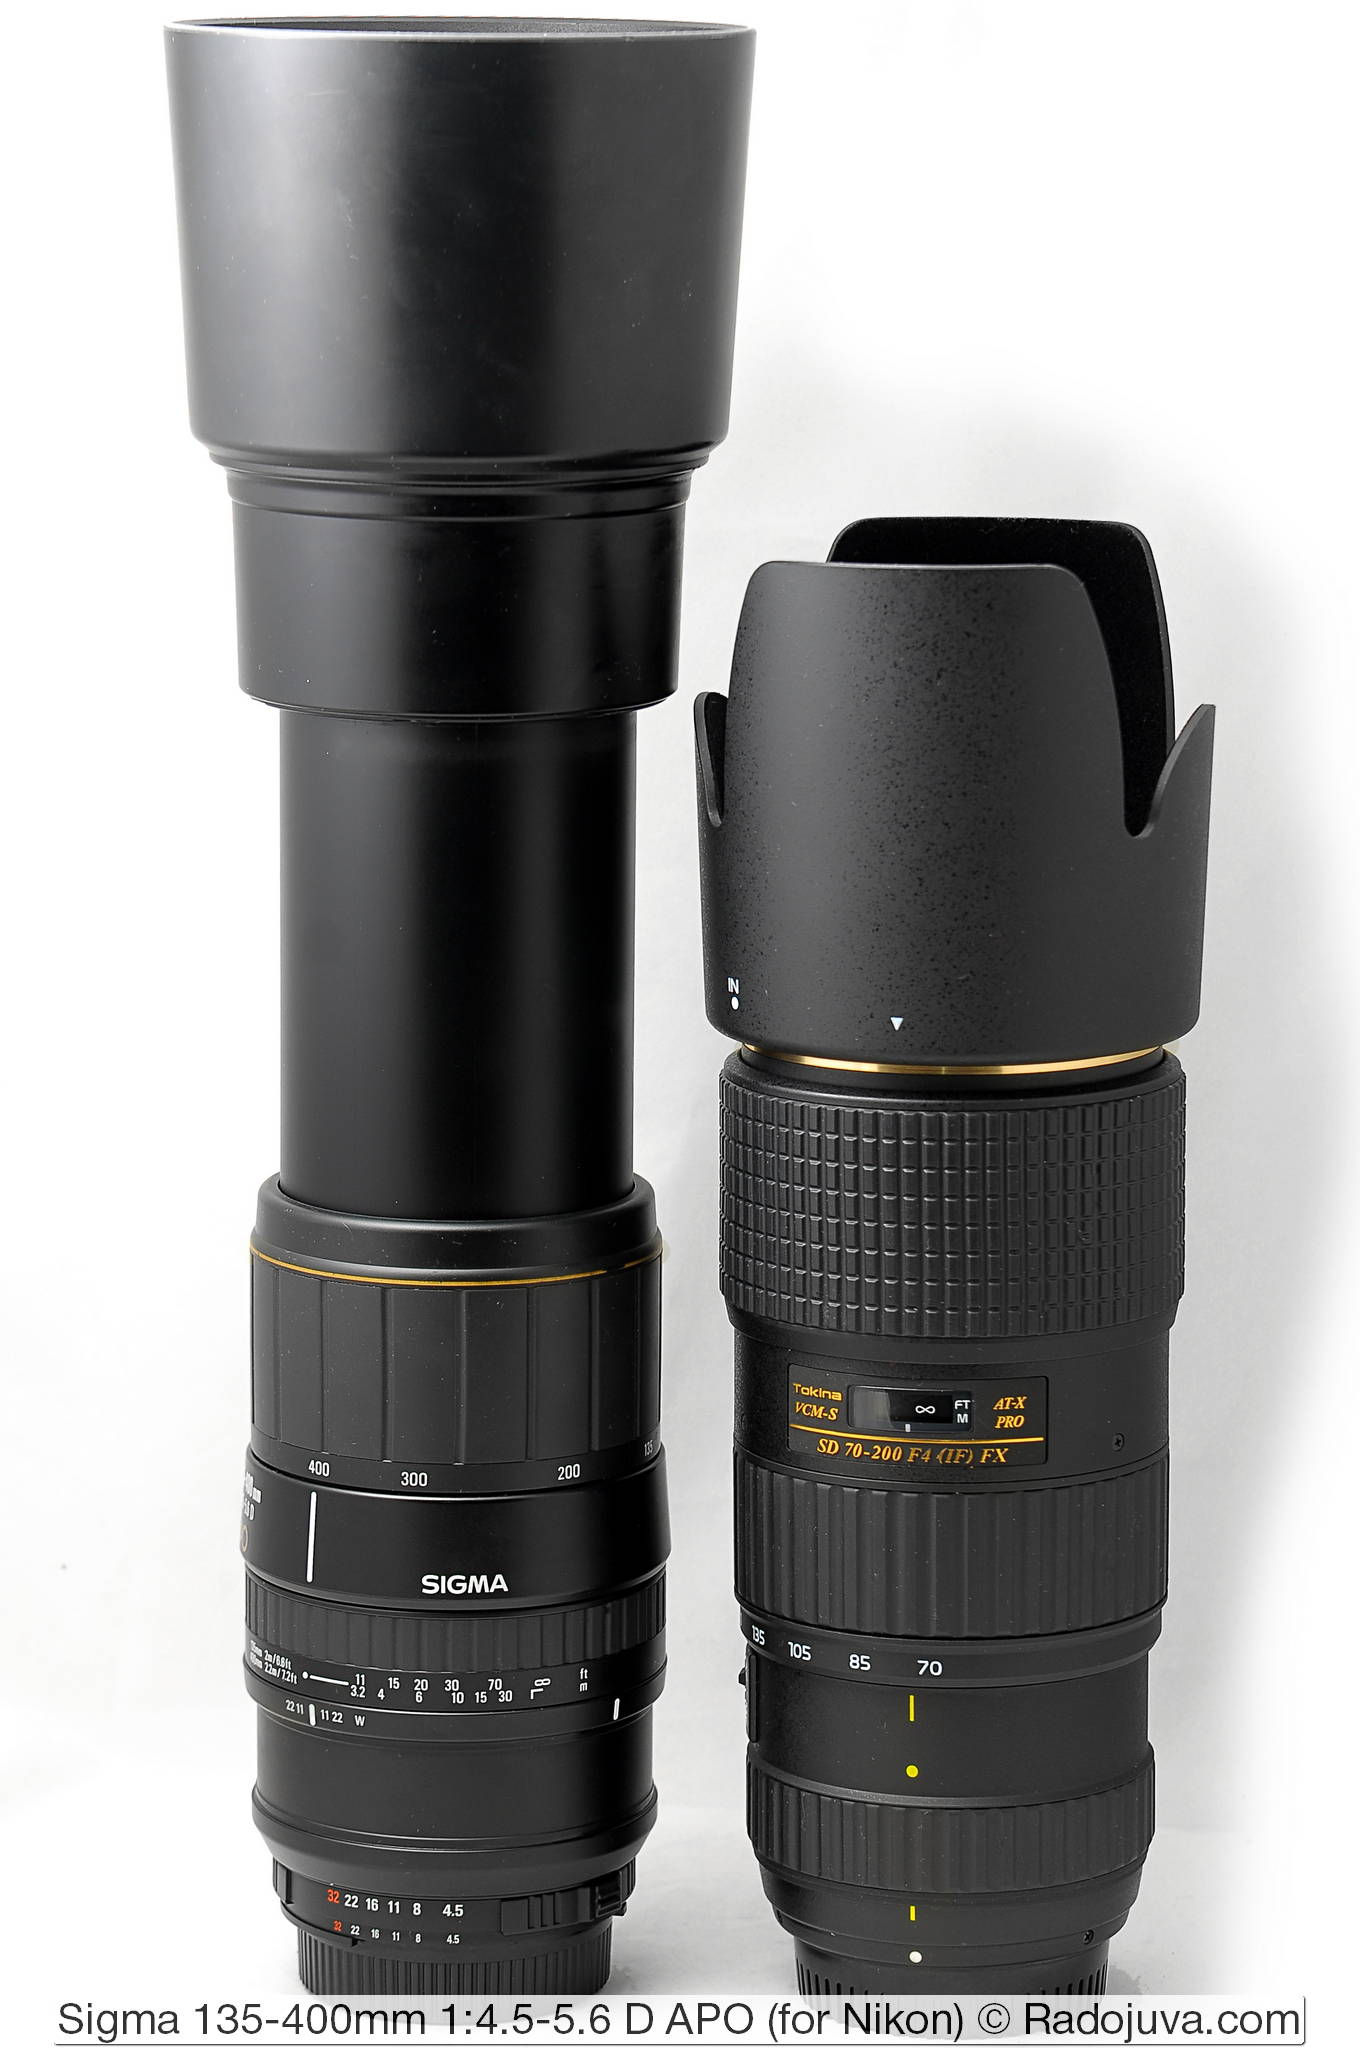 Sizes Sigma 135-400 / 4.5-5.6 and Tokina VCM-S AT-X PRO SD 70-200 F4 (IF) FX